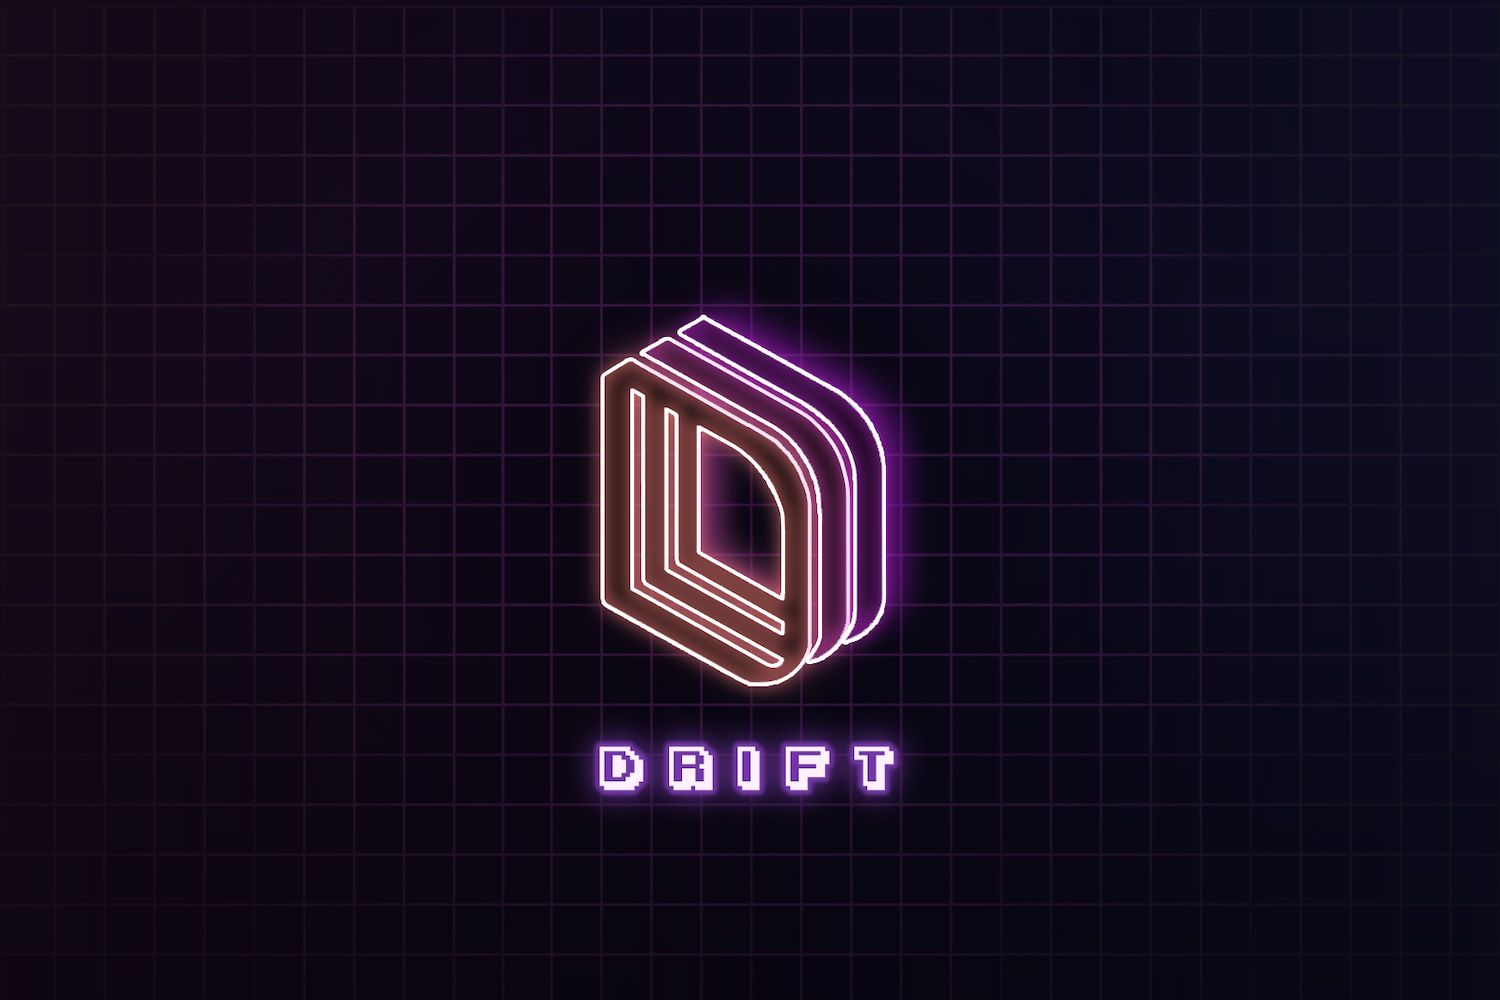 Drift's Game-Changing DLP Unveiled